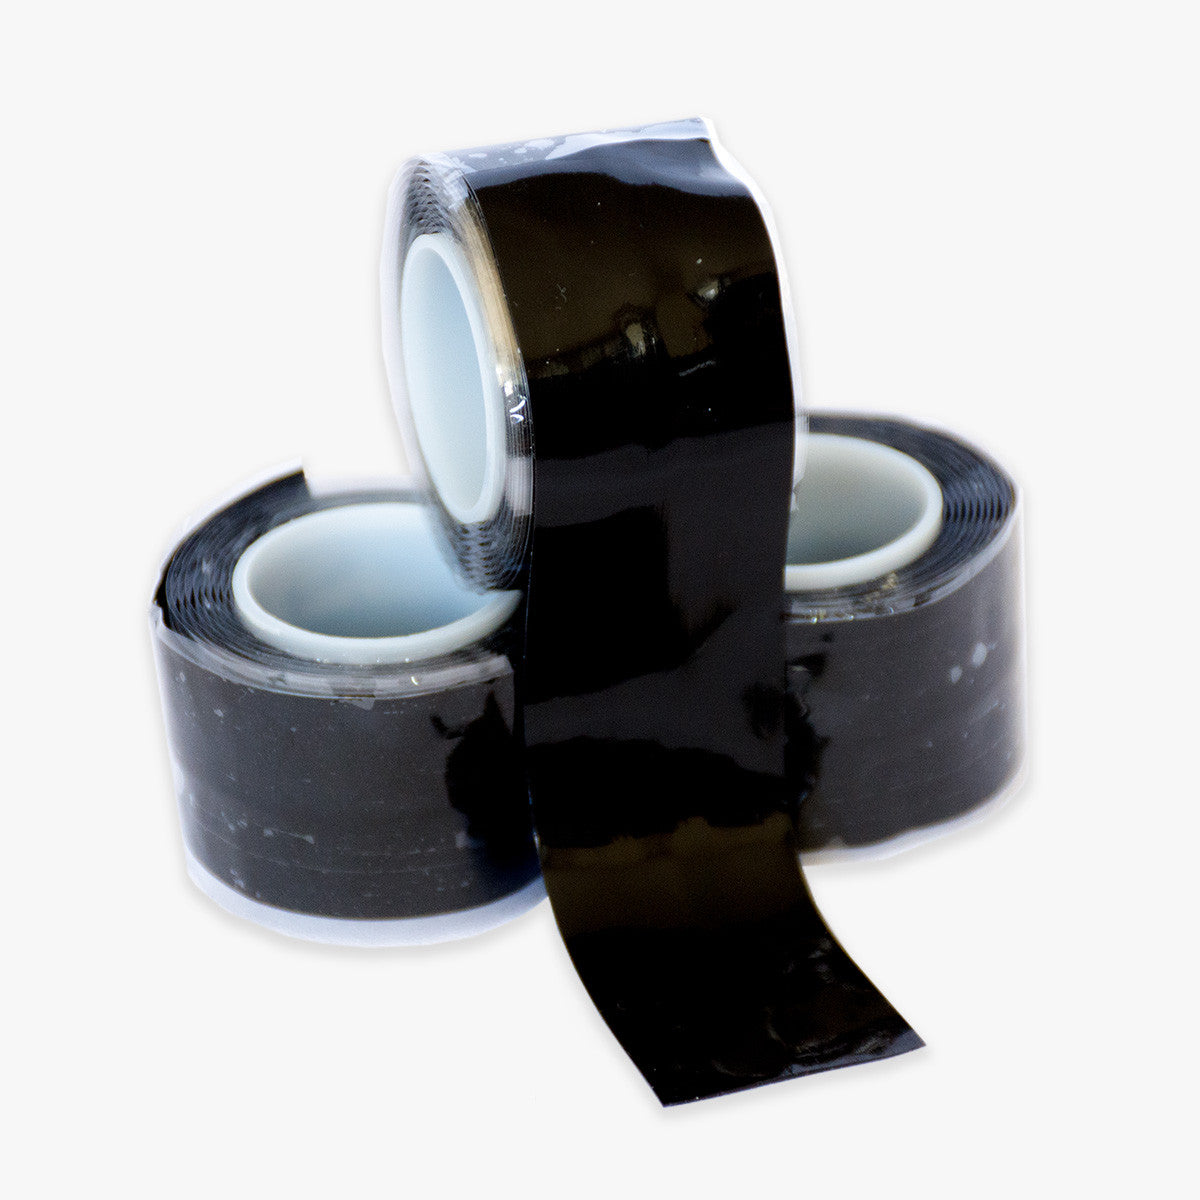 Water Resistant Silicone Grip Tape